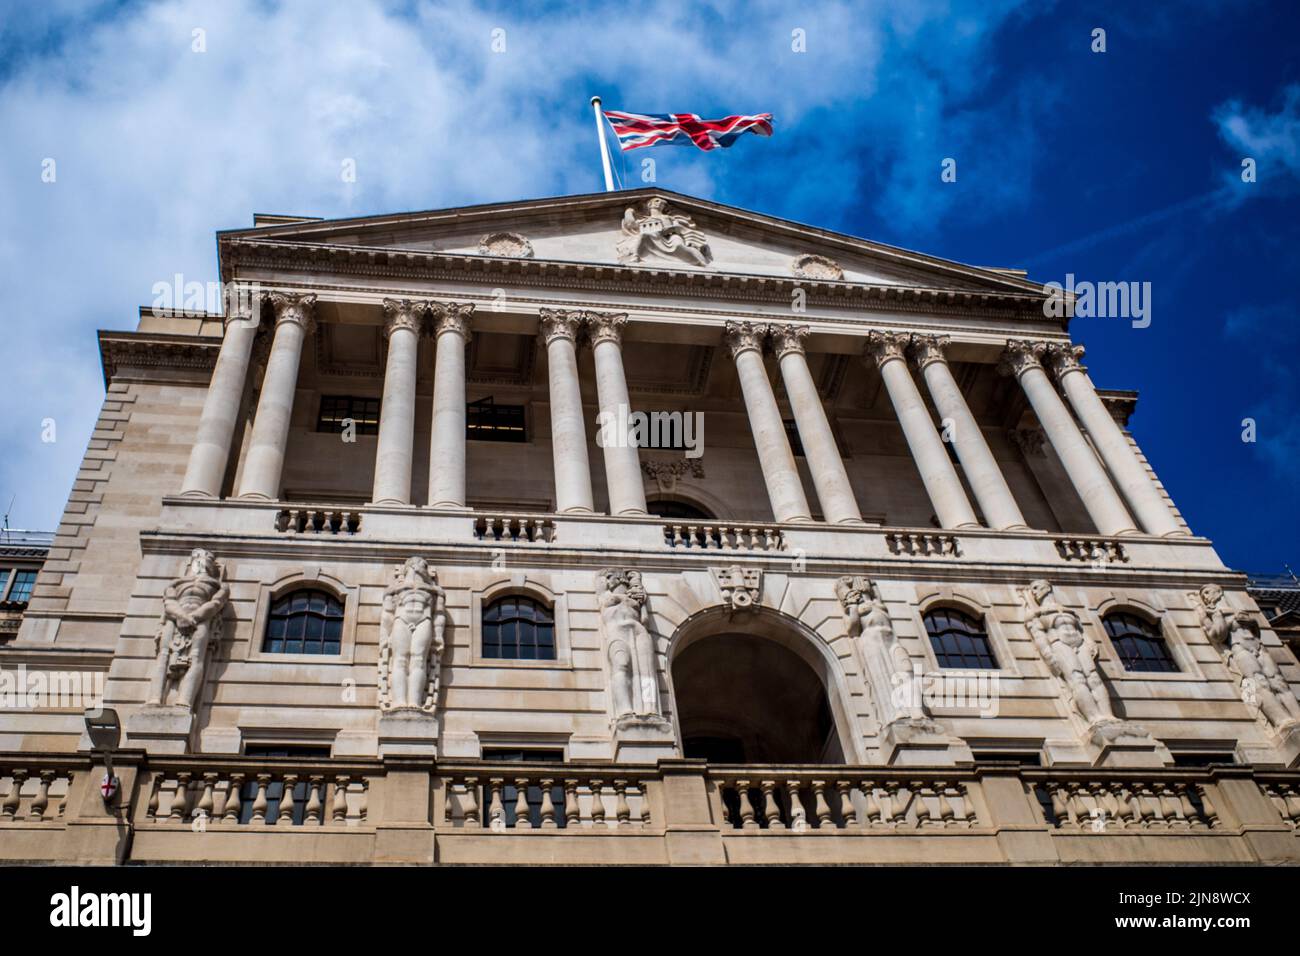 The Bank of England HQ London. The UK Central Bank, the Bank of England BoE HQ Threadneedle St in the City of London Financial District. Stock Photo